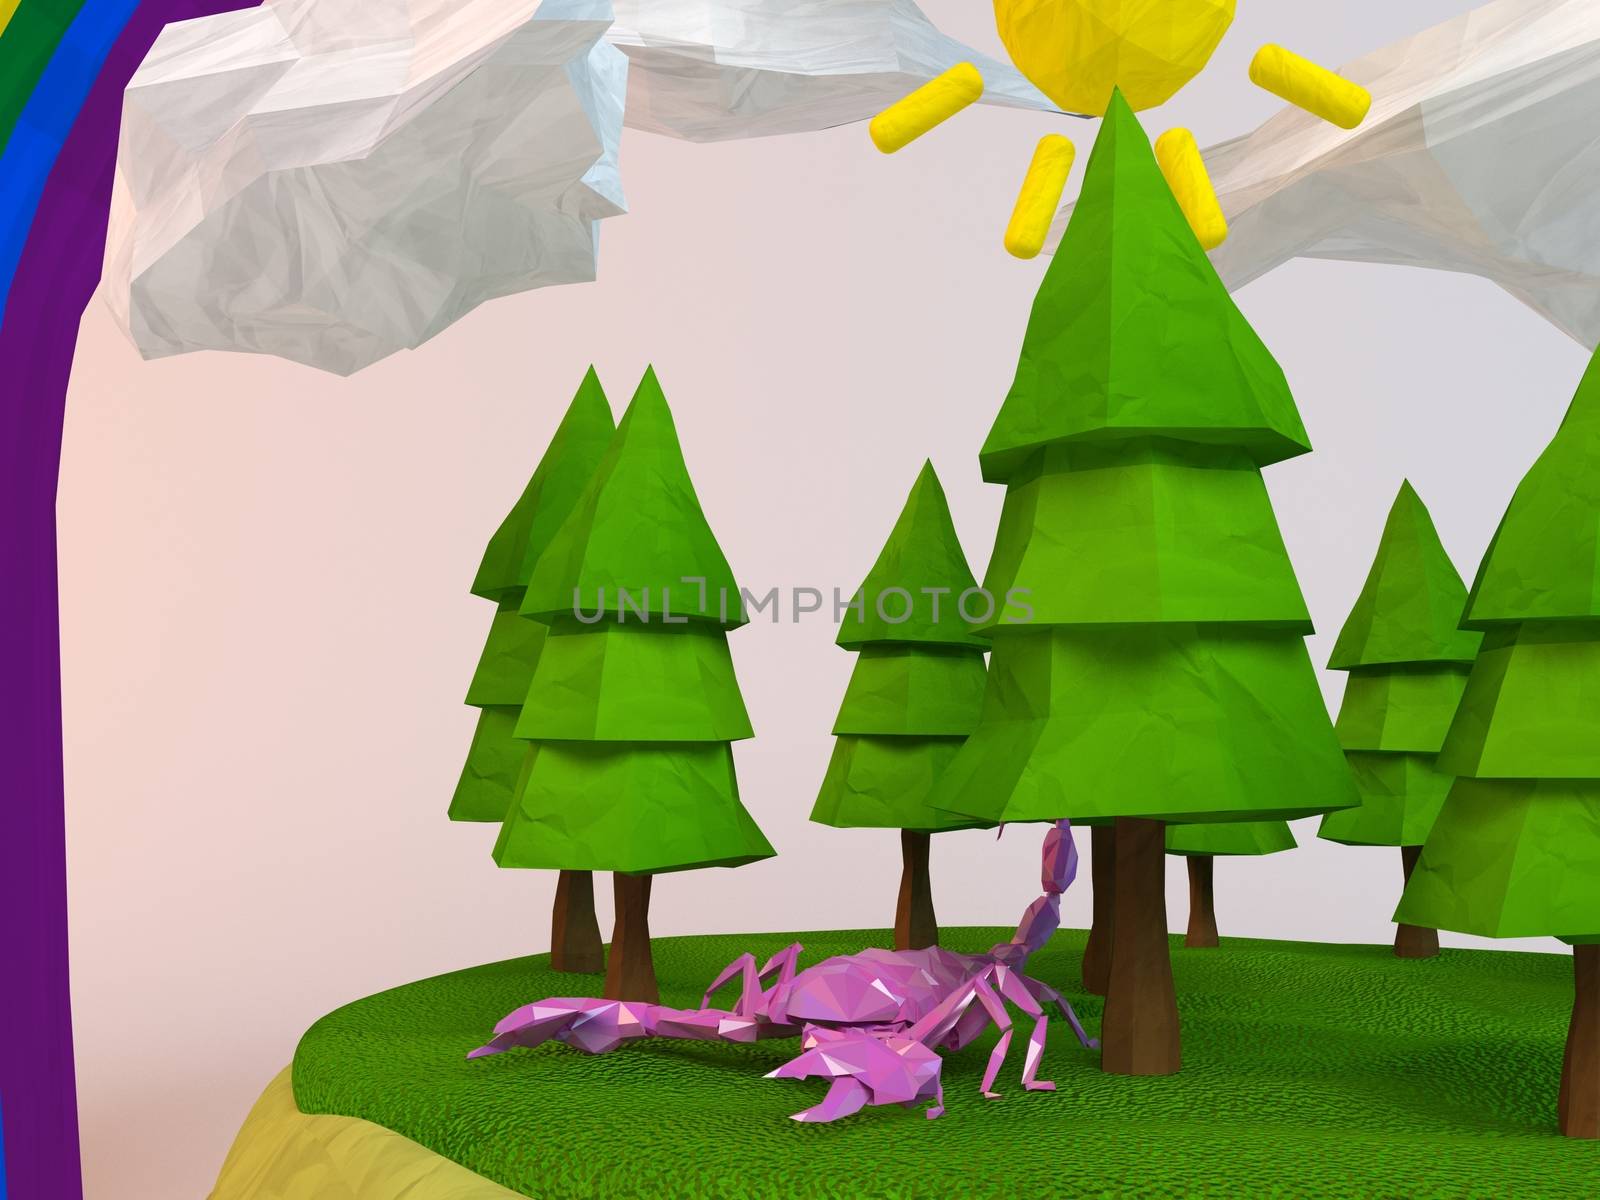 3d scorpion inside a low-poly green scene with sun, trees, clouds and a rainbow